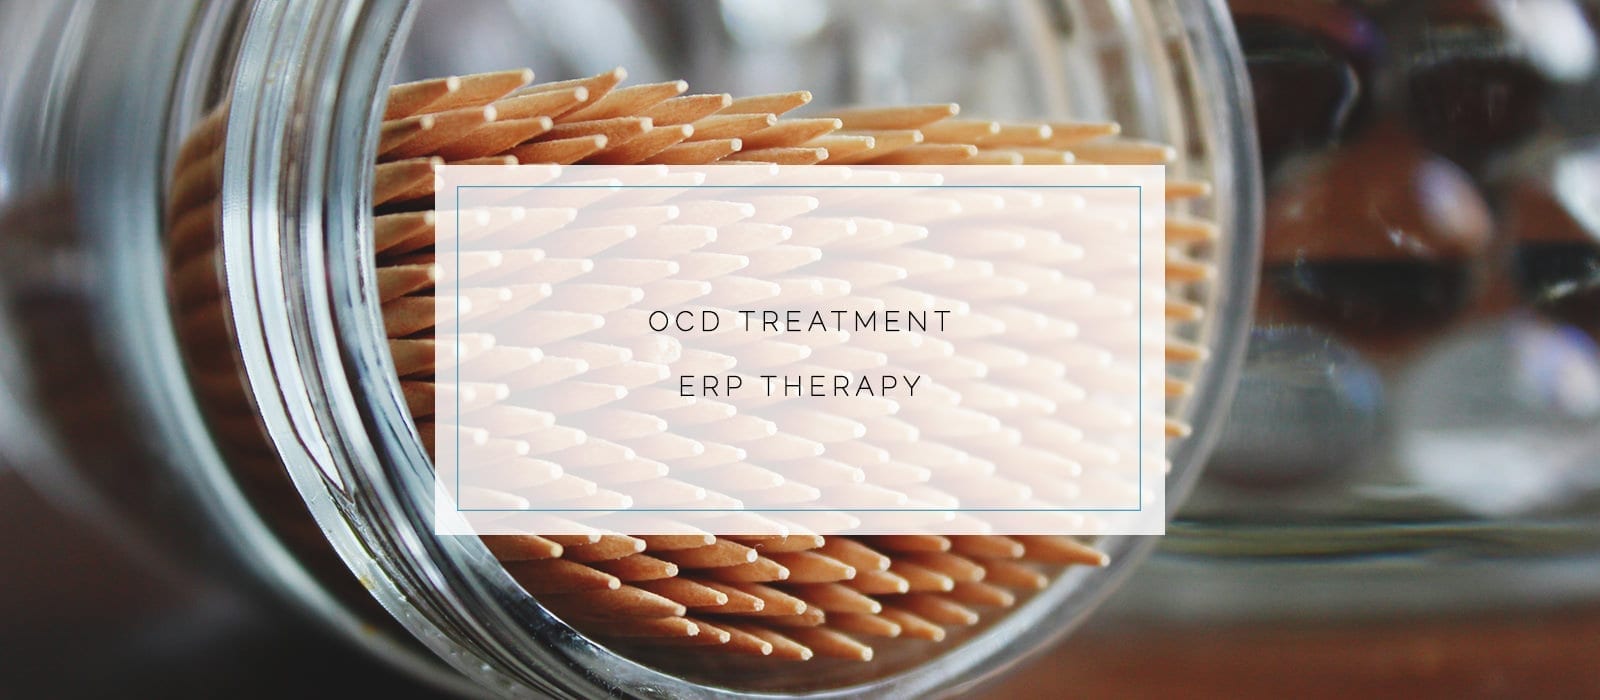 OCD Treatment & ERP Therapy